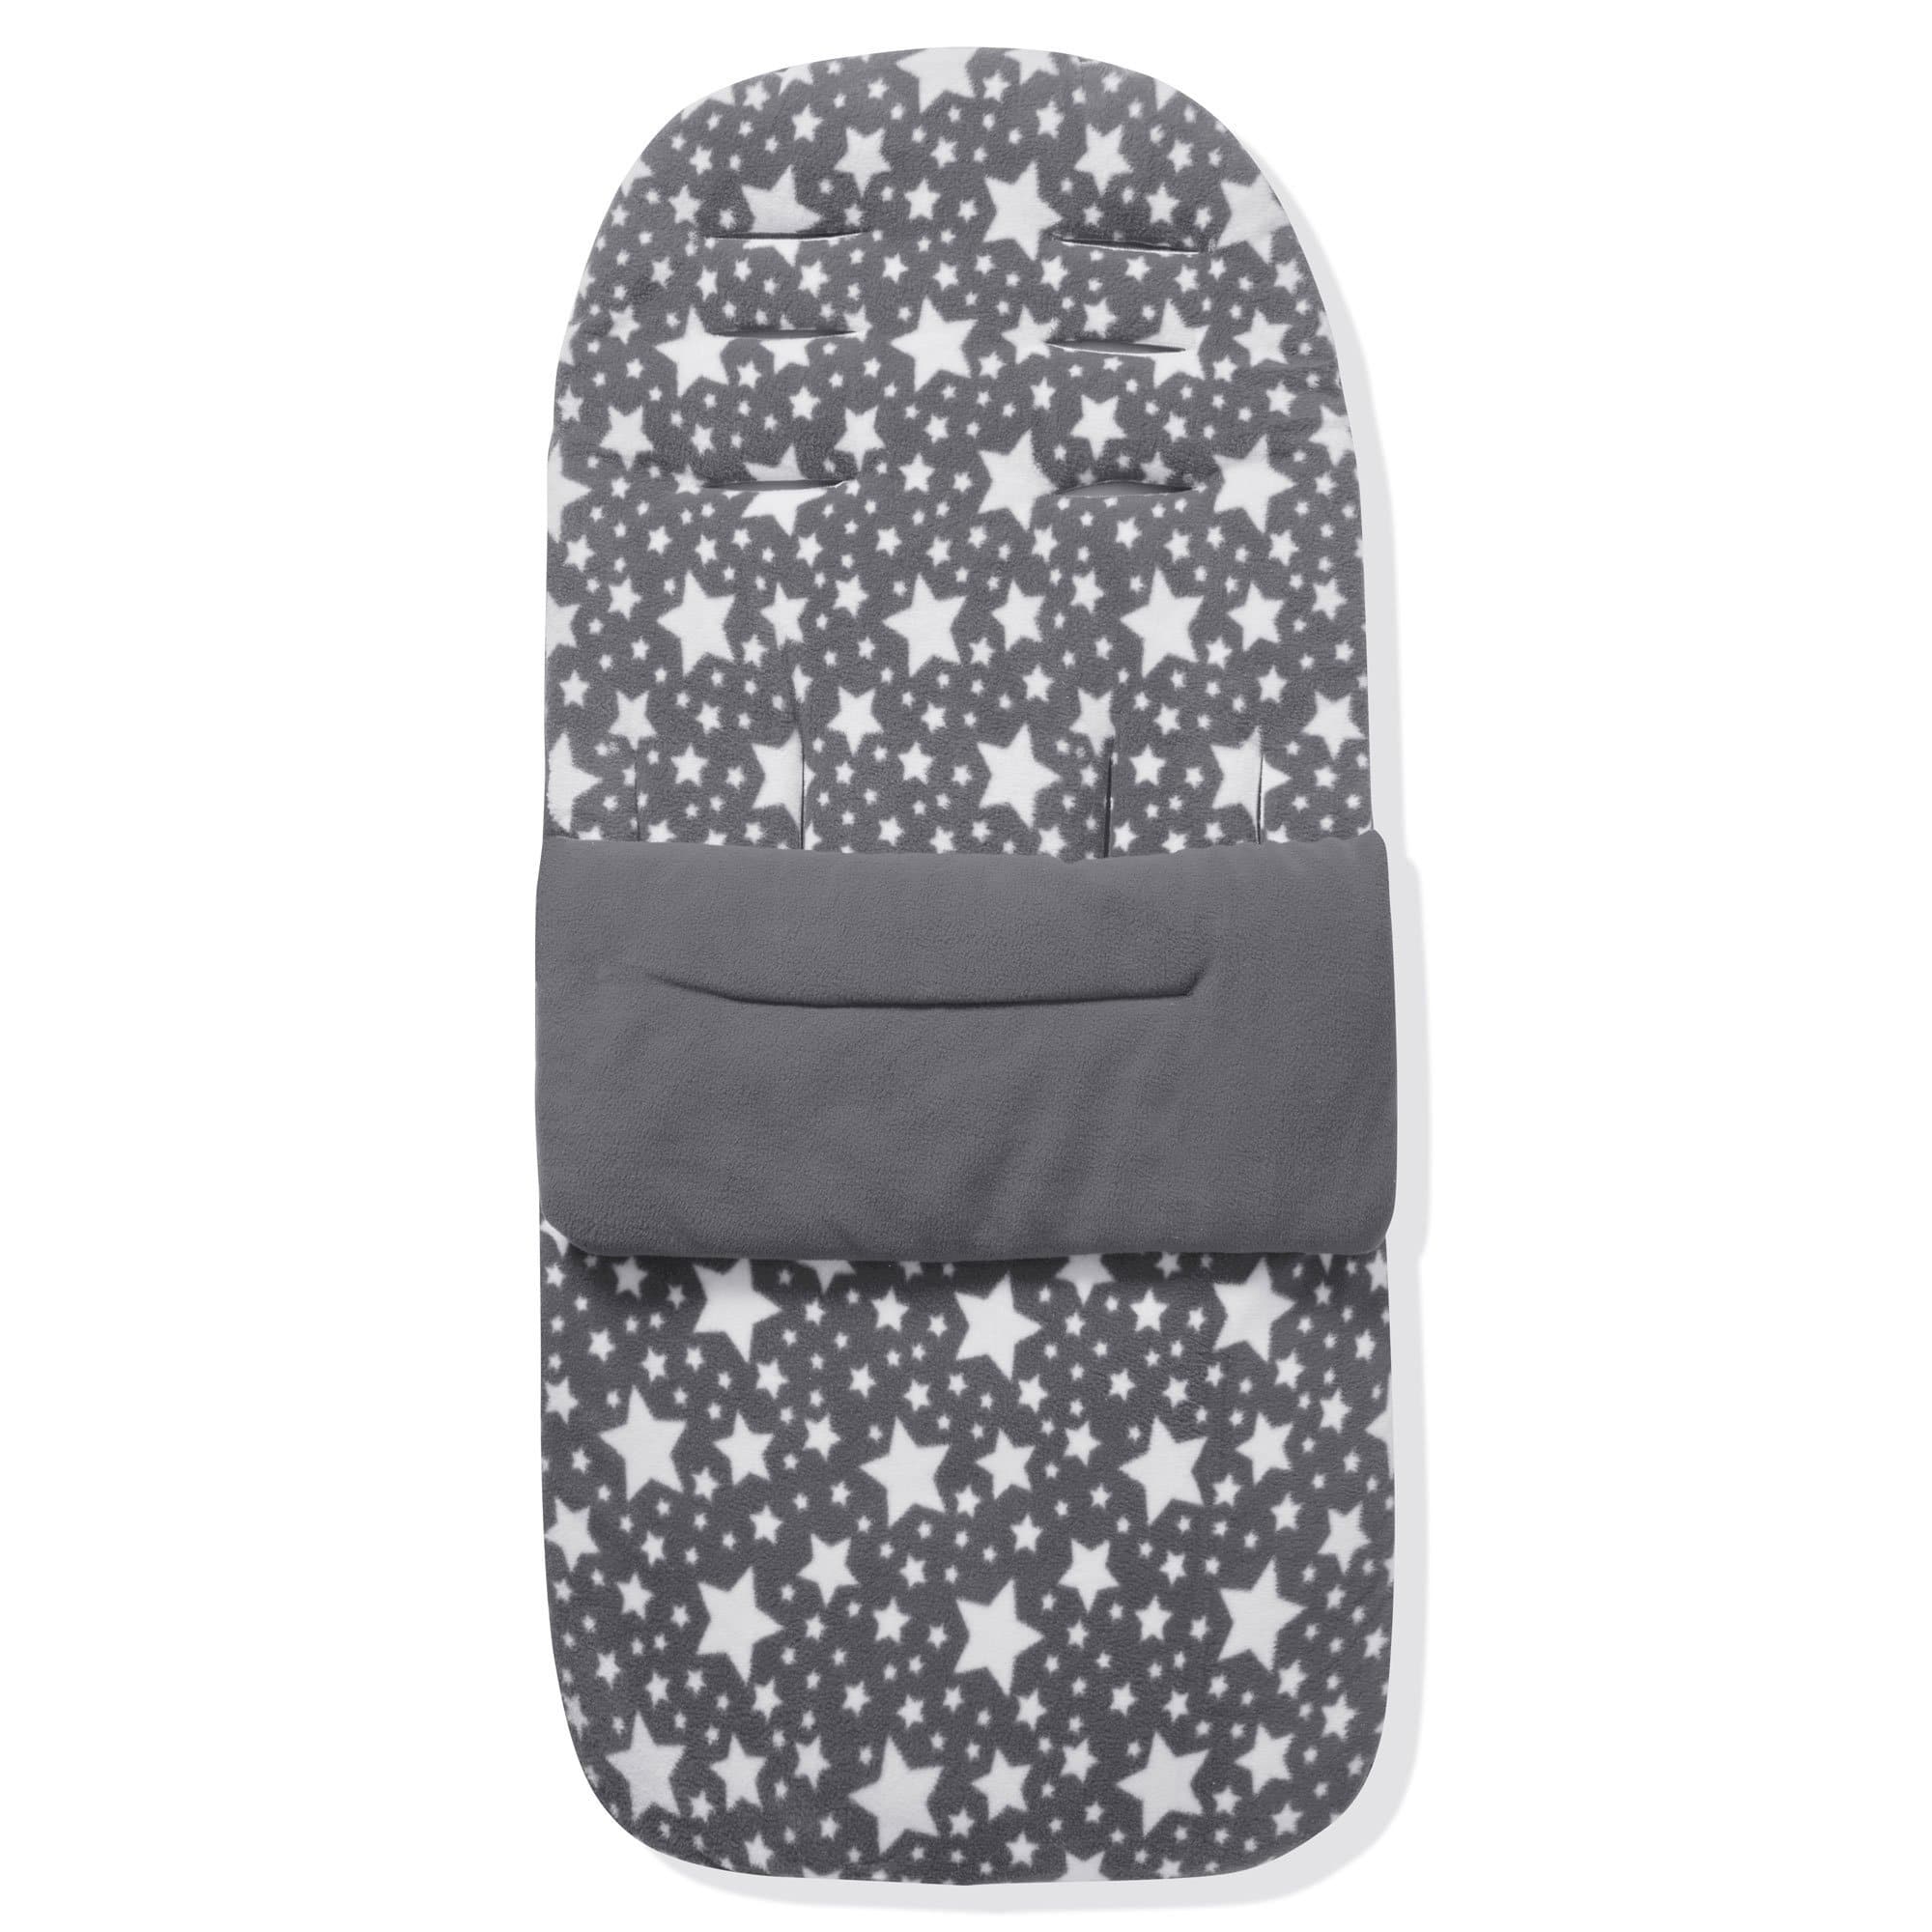 Fleece Footmuff / Cosy Toes Compatible with Inglesina - Grey Star / Fits All Models | For Your Little One